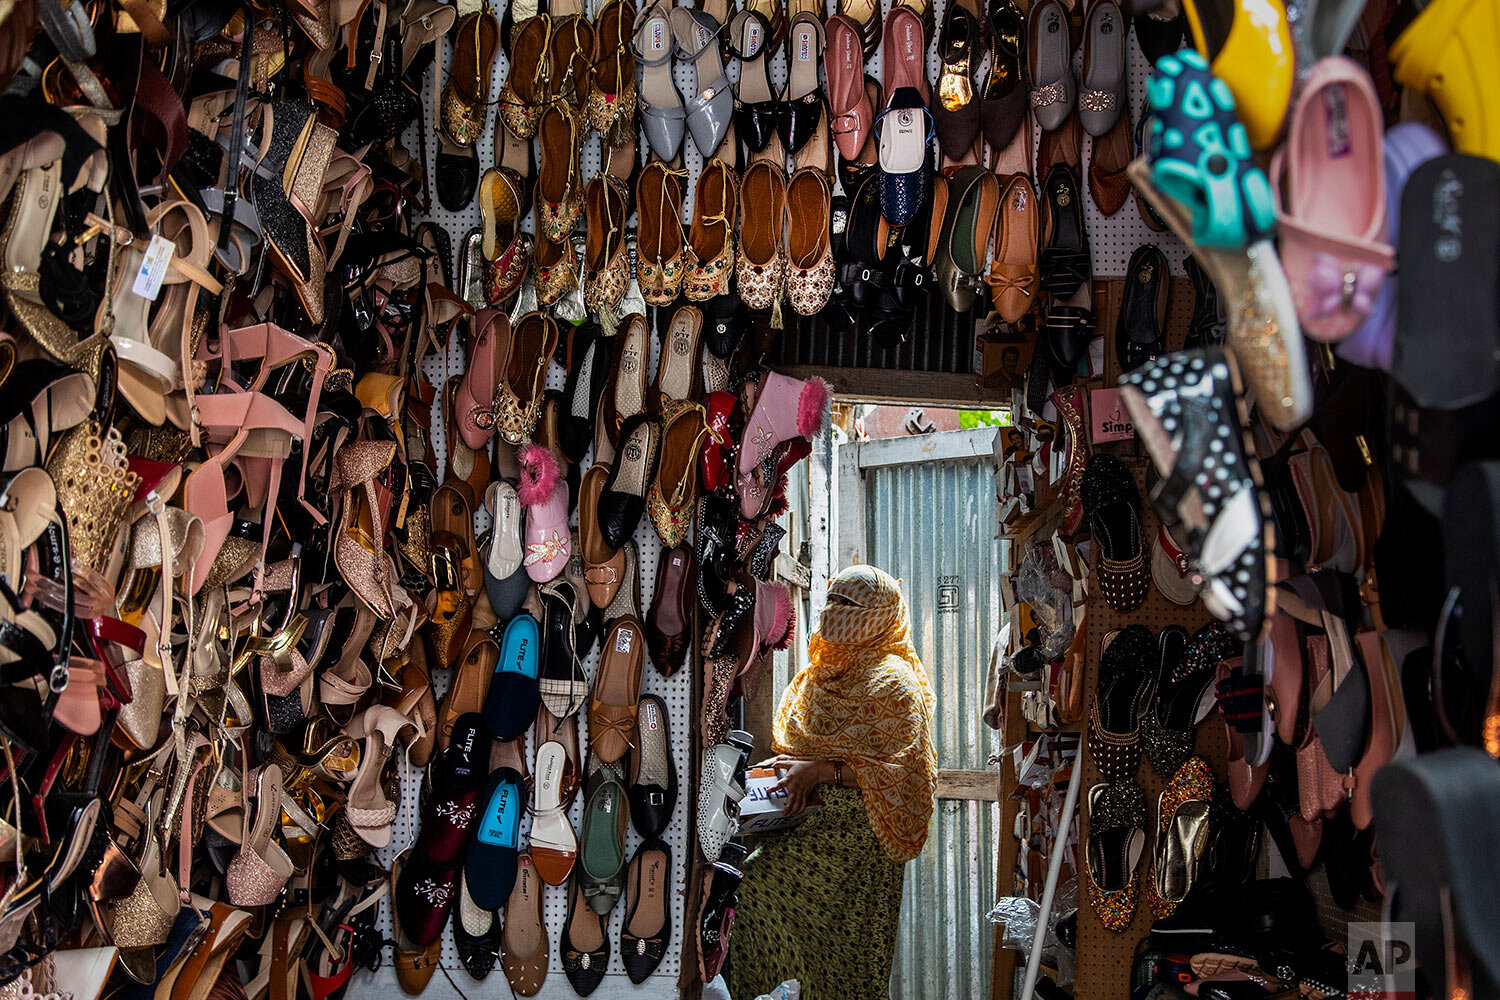  A shopkeeper arranges shoes during a partial relaxation of restrictions to curb the spread of coronavirus in Gauhati, India, Wednesday, June 9, 2021. (AP Photo/Anupam Nath) 